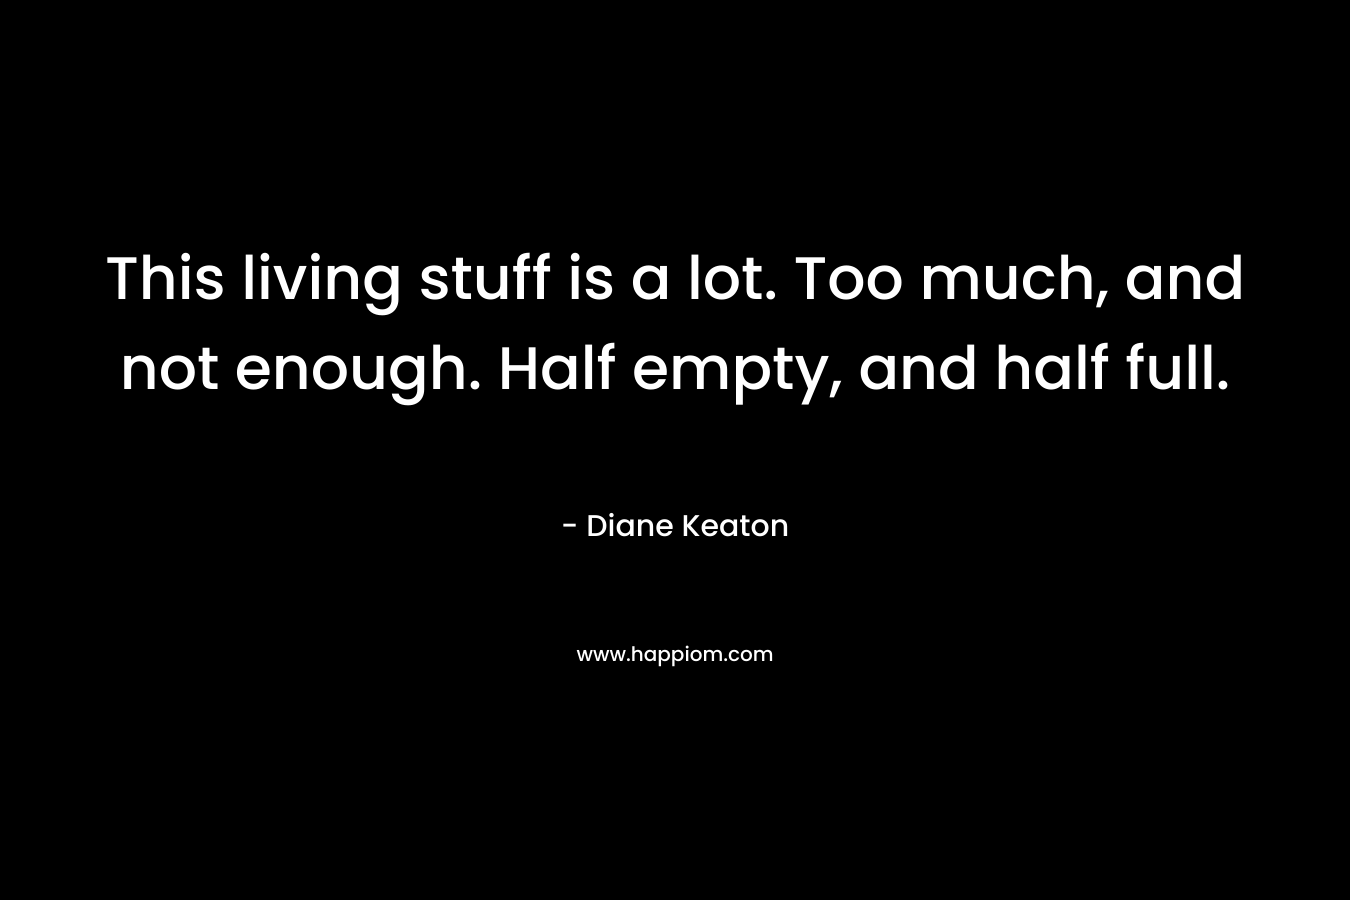 This living stuff is a lot. Too much, and not enough. Half empty, and half full.